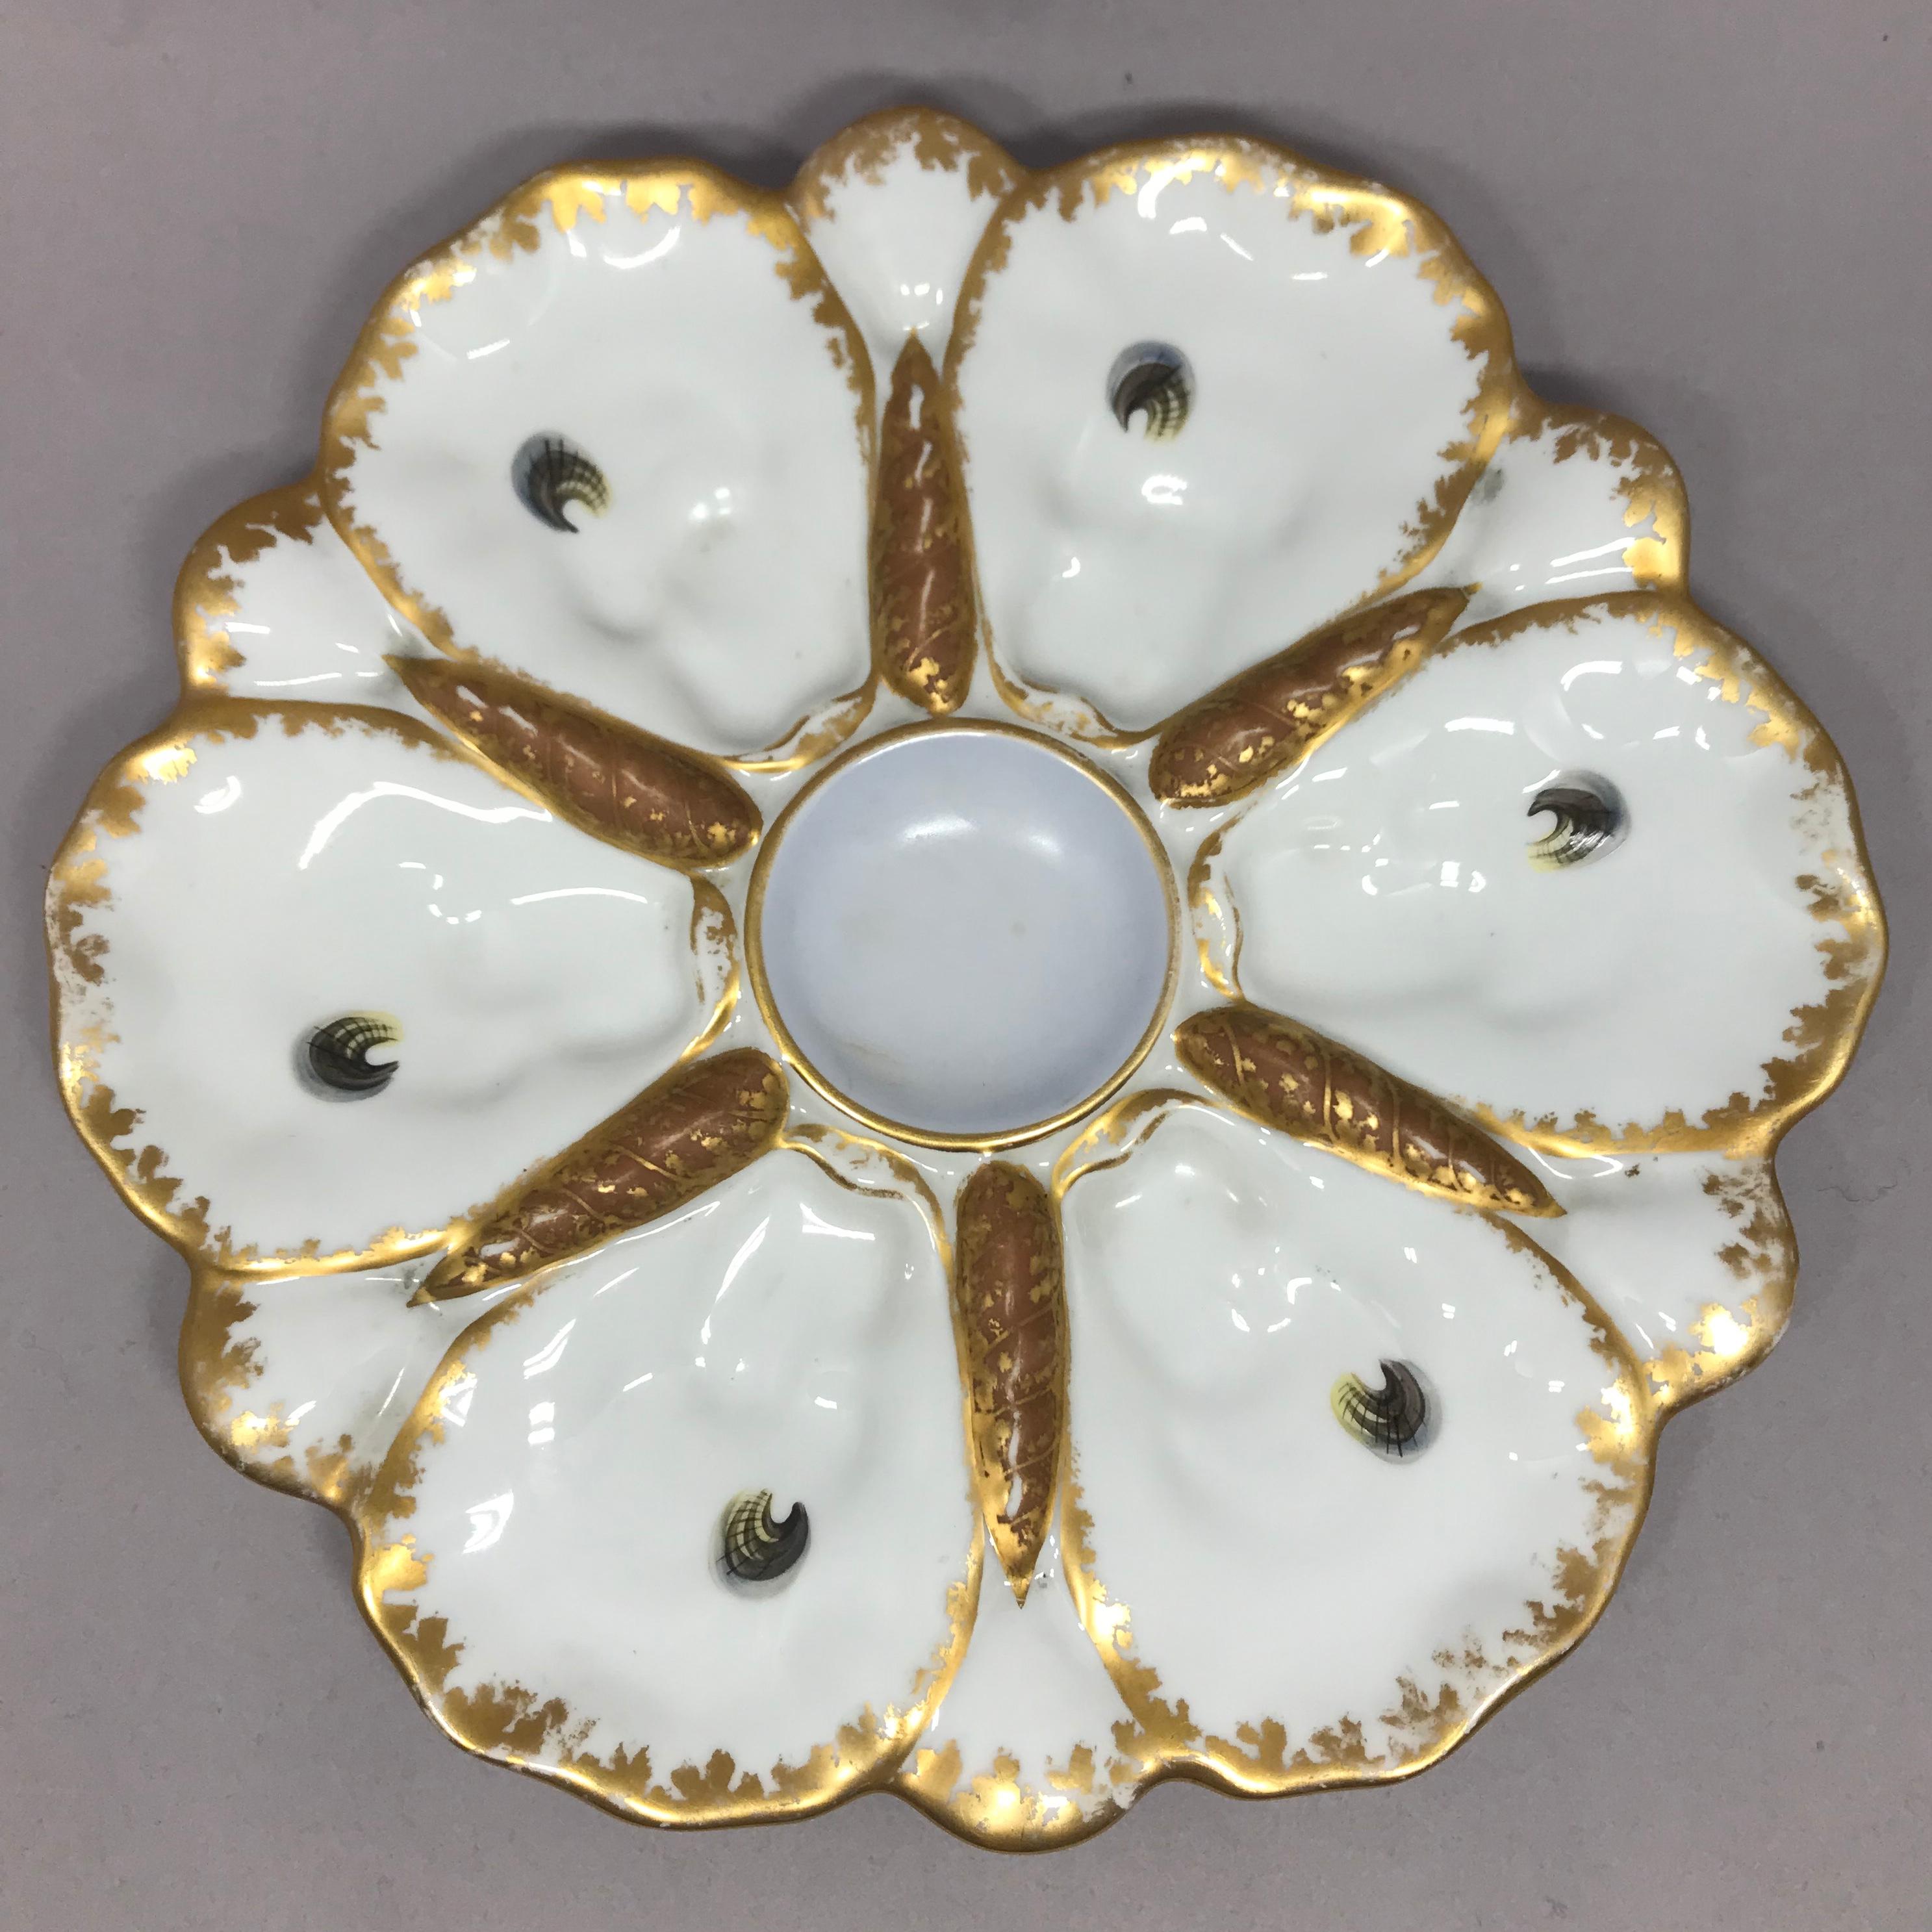 Set of ten Limoges oyster plates. Ten painted and gilt trimmed oyster plates for six oysters with central sauce wells painted in rose (2), violet (3), blue-green (3), and yellow (2). France, circa 1900.
Dimensions: 9.5